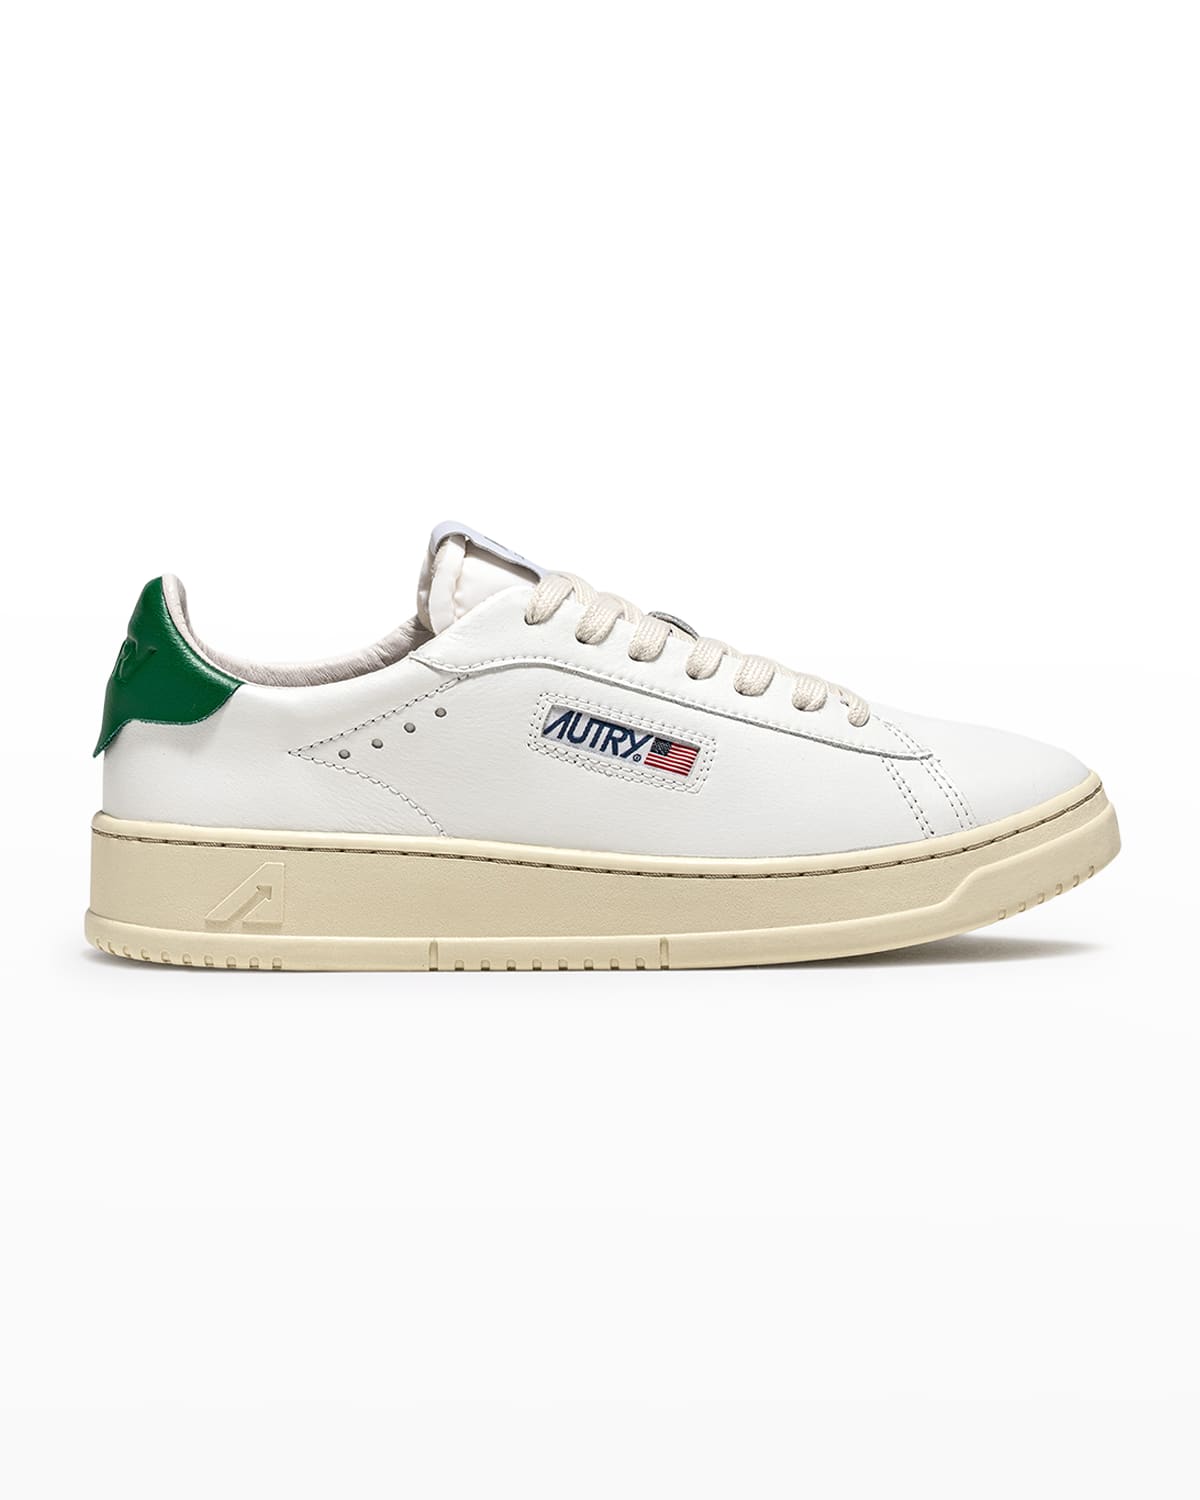 Autry Dalls Low-top Bicolor Leather Sneakers In White Green